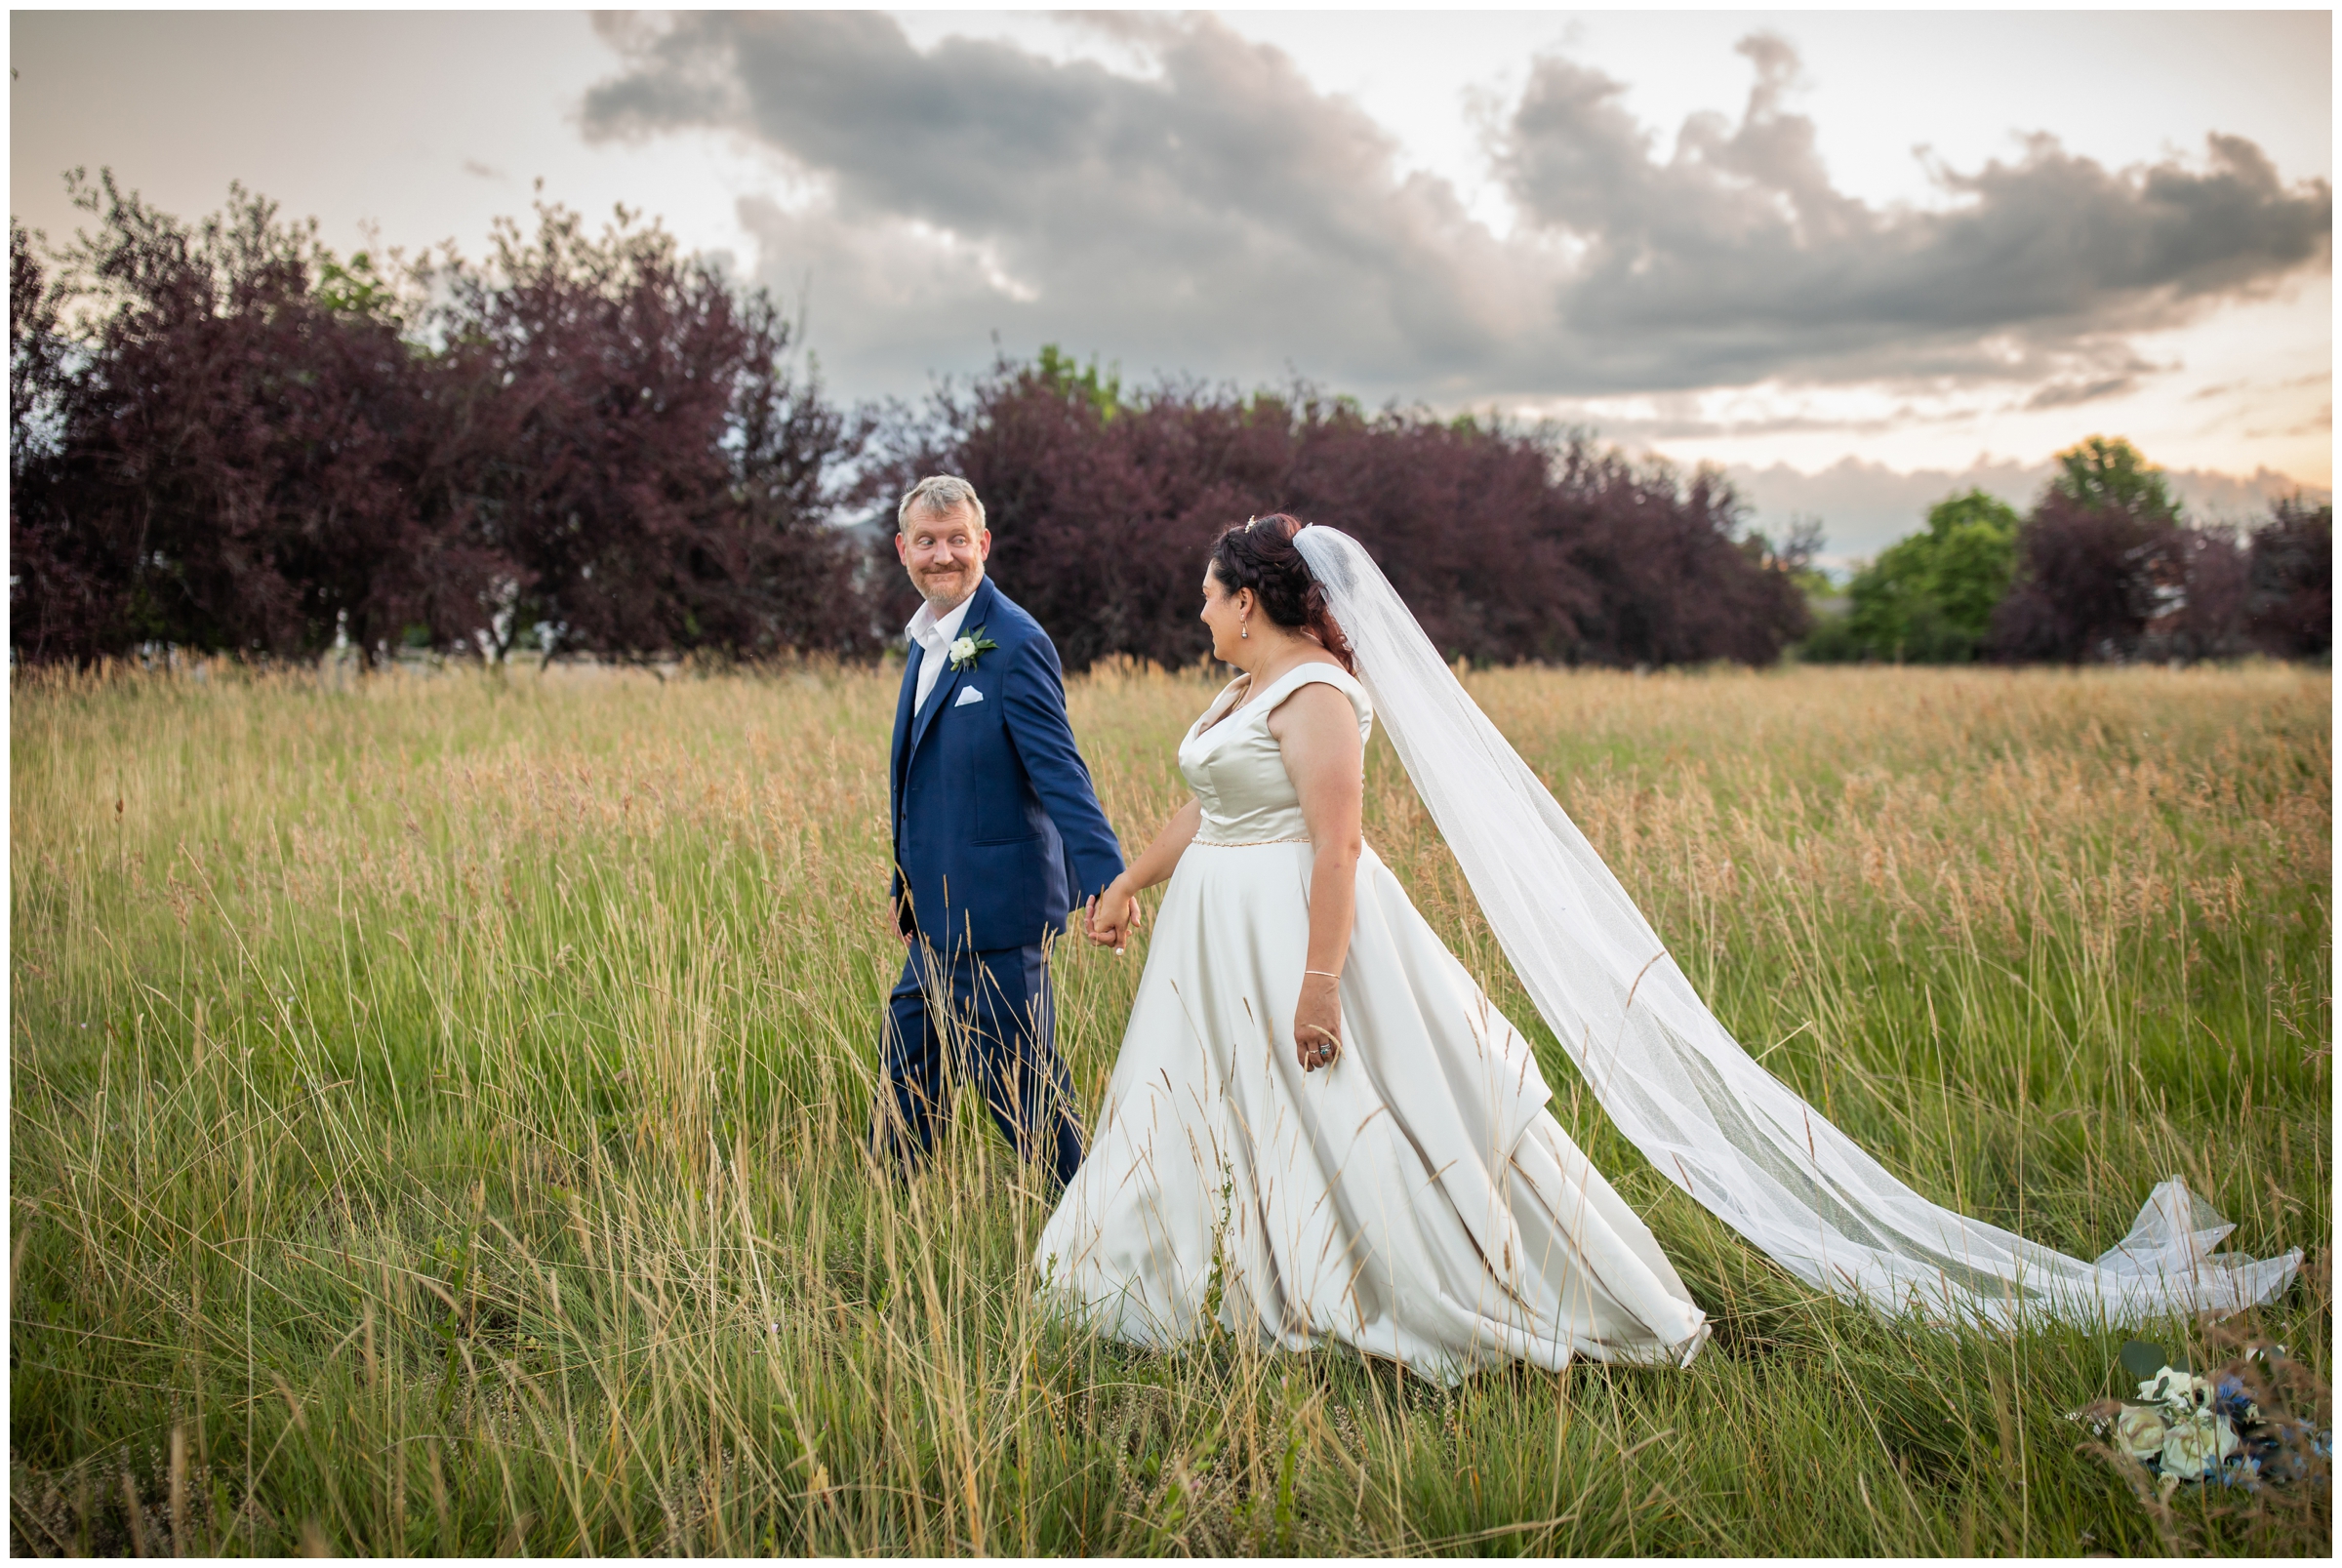 couple walking through a field at sunset during Colorado summer wedding portraits at Lionsgate Event Center 